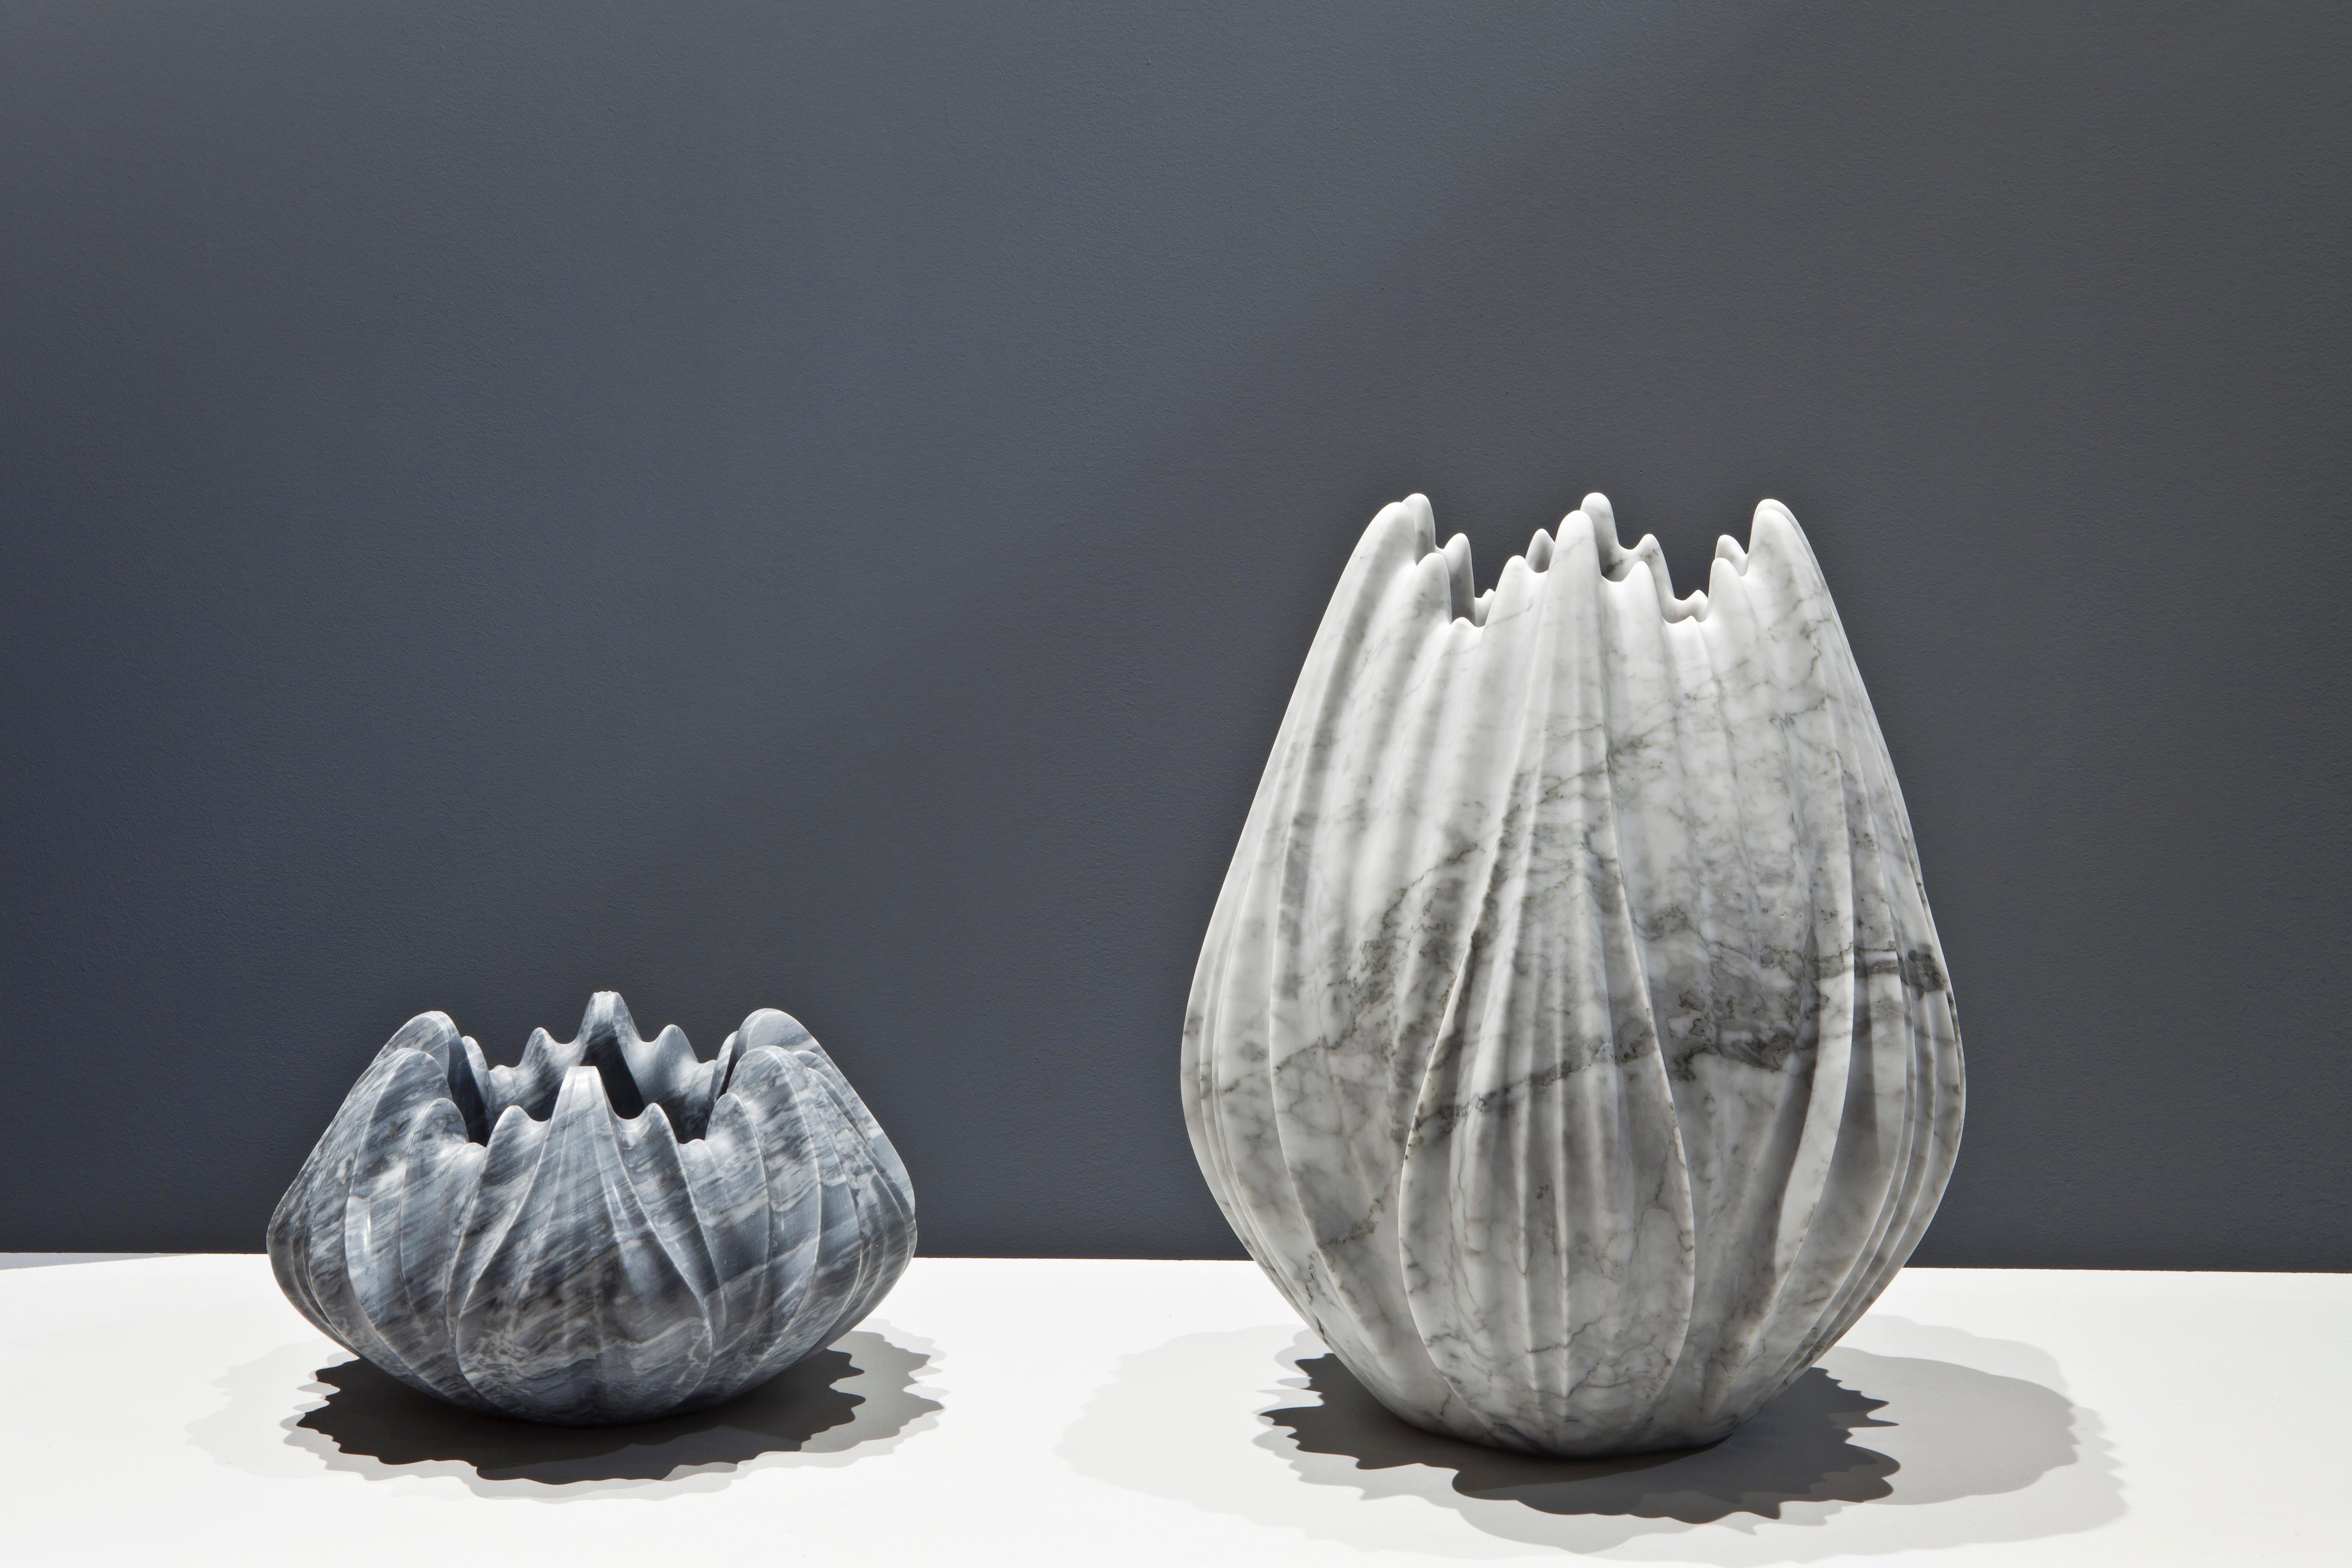 The Tau vases created by the iconic Zaha Hadid appear organic; emerging as a series of intricately rendered pleats expressing the formal complexity of natural growth systems. 

Seemingly as delicate as flower petals, the fragile aesthetic of the